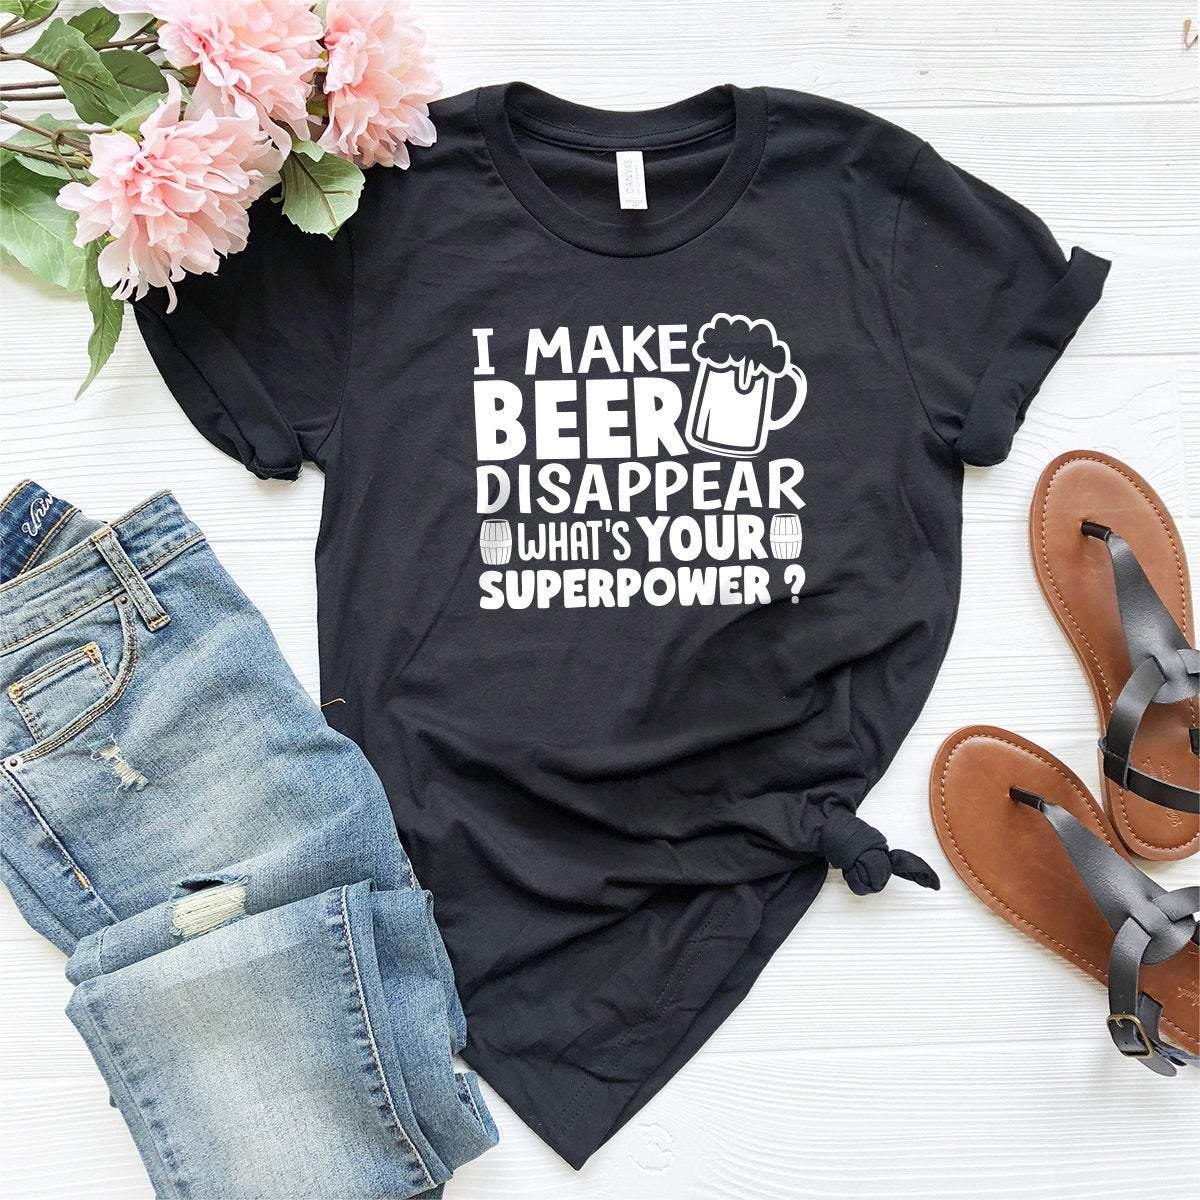 Funny Beer Tshirt, Beer Lover Shirt, Beer Shirt, I Make Beer Disappear What's Your Superpower Shirt, Funny Drinking Gift, Beer Graphic Tee - Fastdeliverytees.com